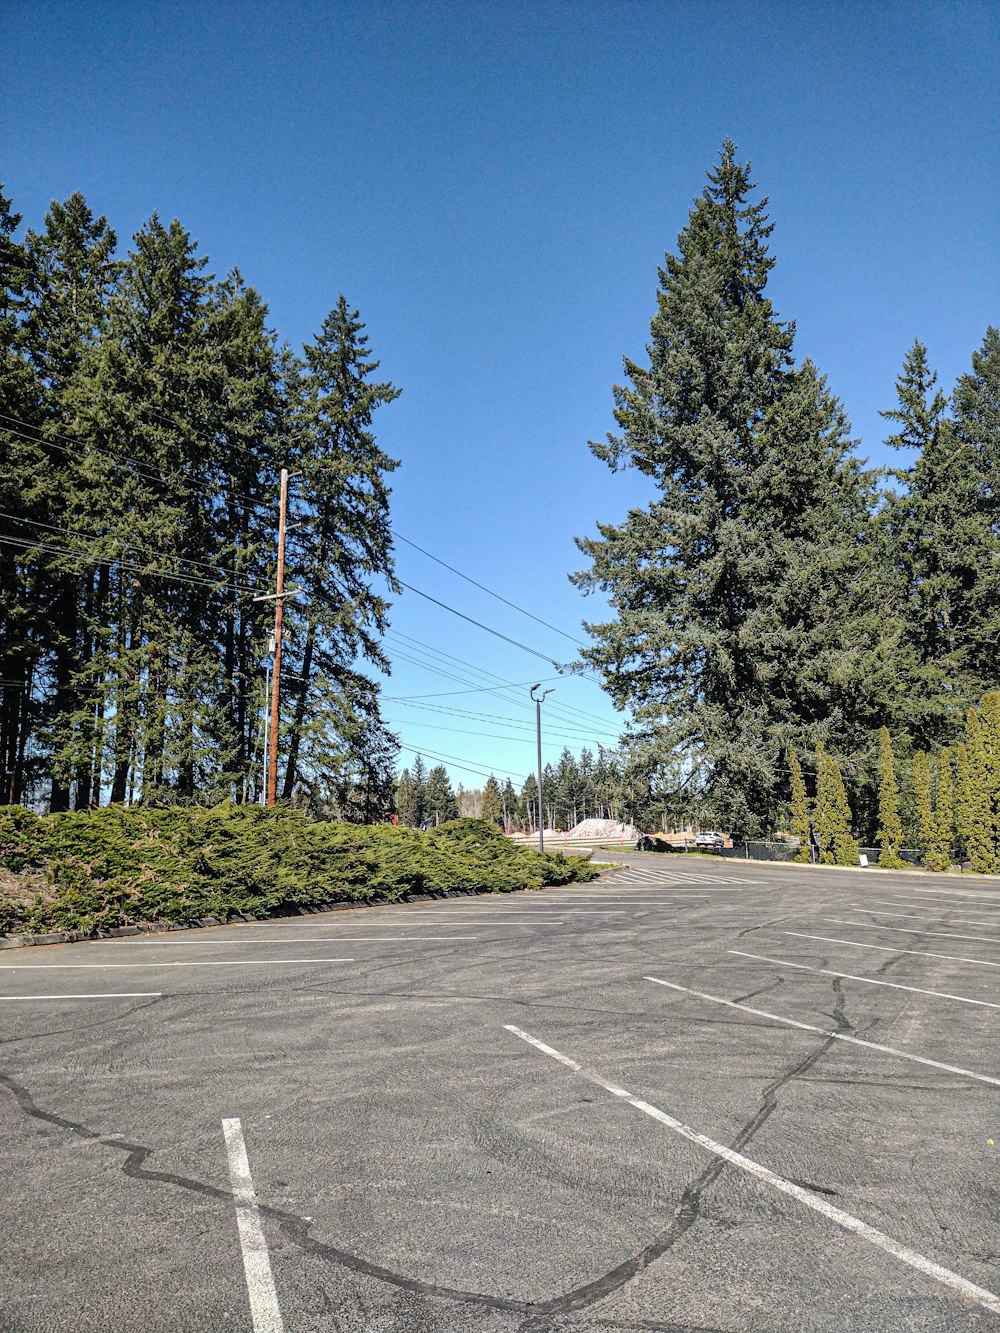 an empty parking lot with trees in the background